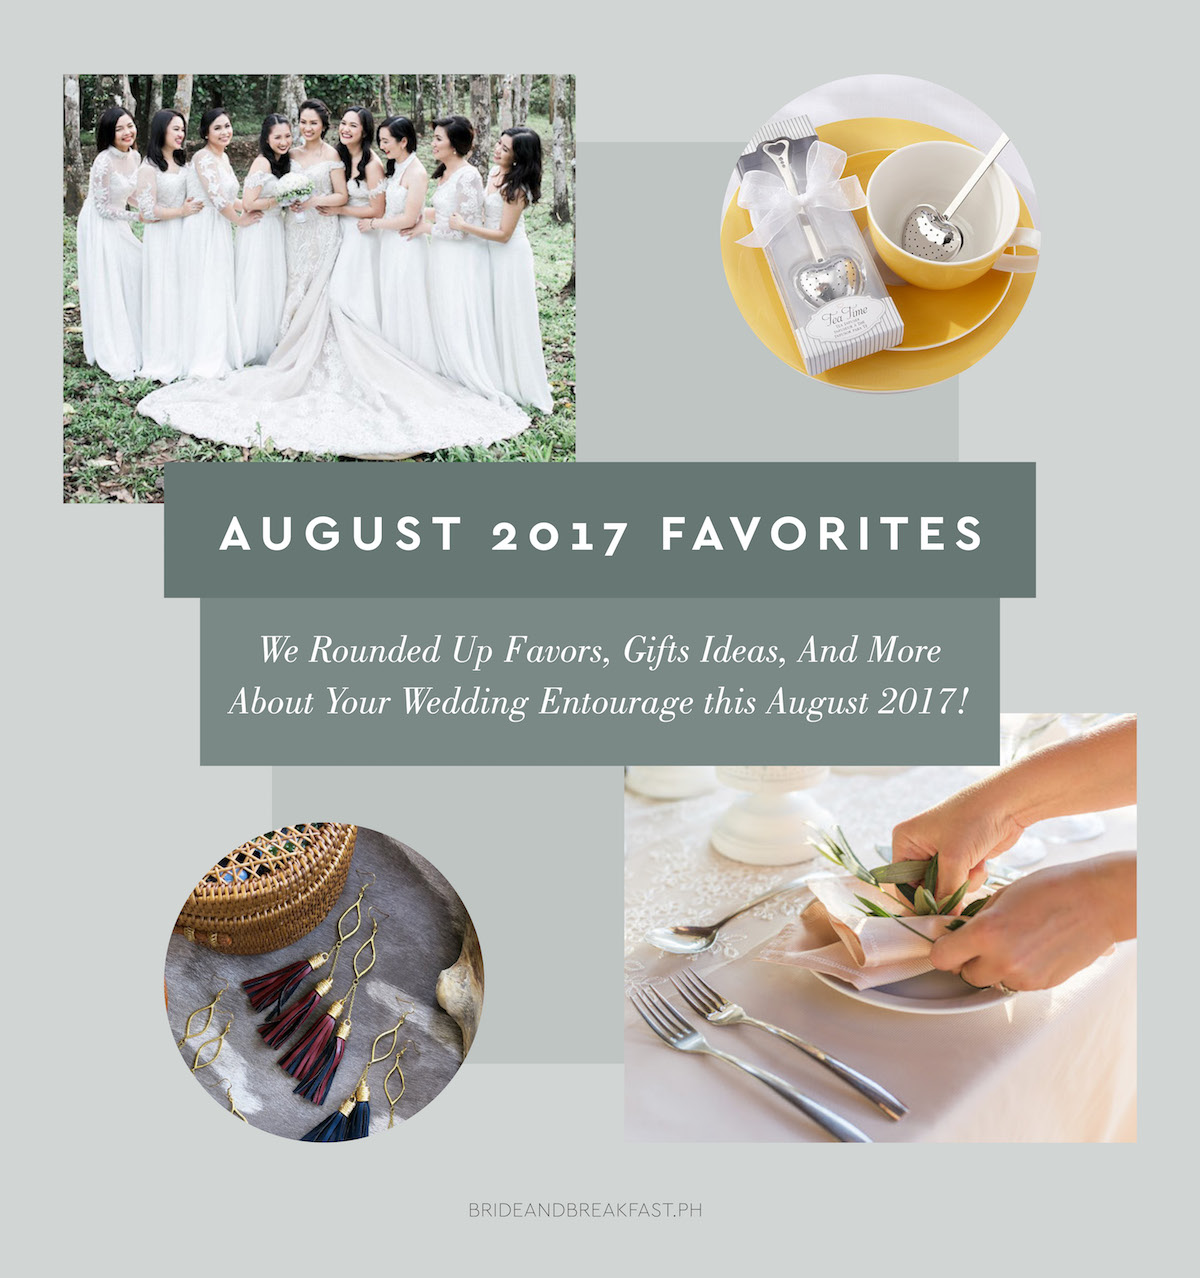 August 2017 Favorites We Rounded Up Favors, Gift Ideas, and More About Your Wedding Entourage this August 2017!